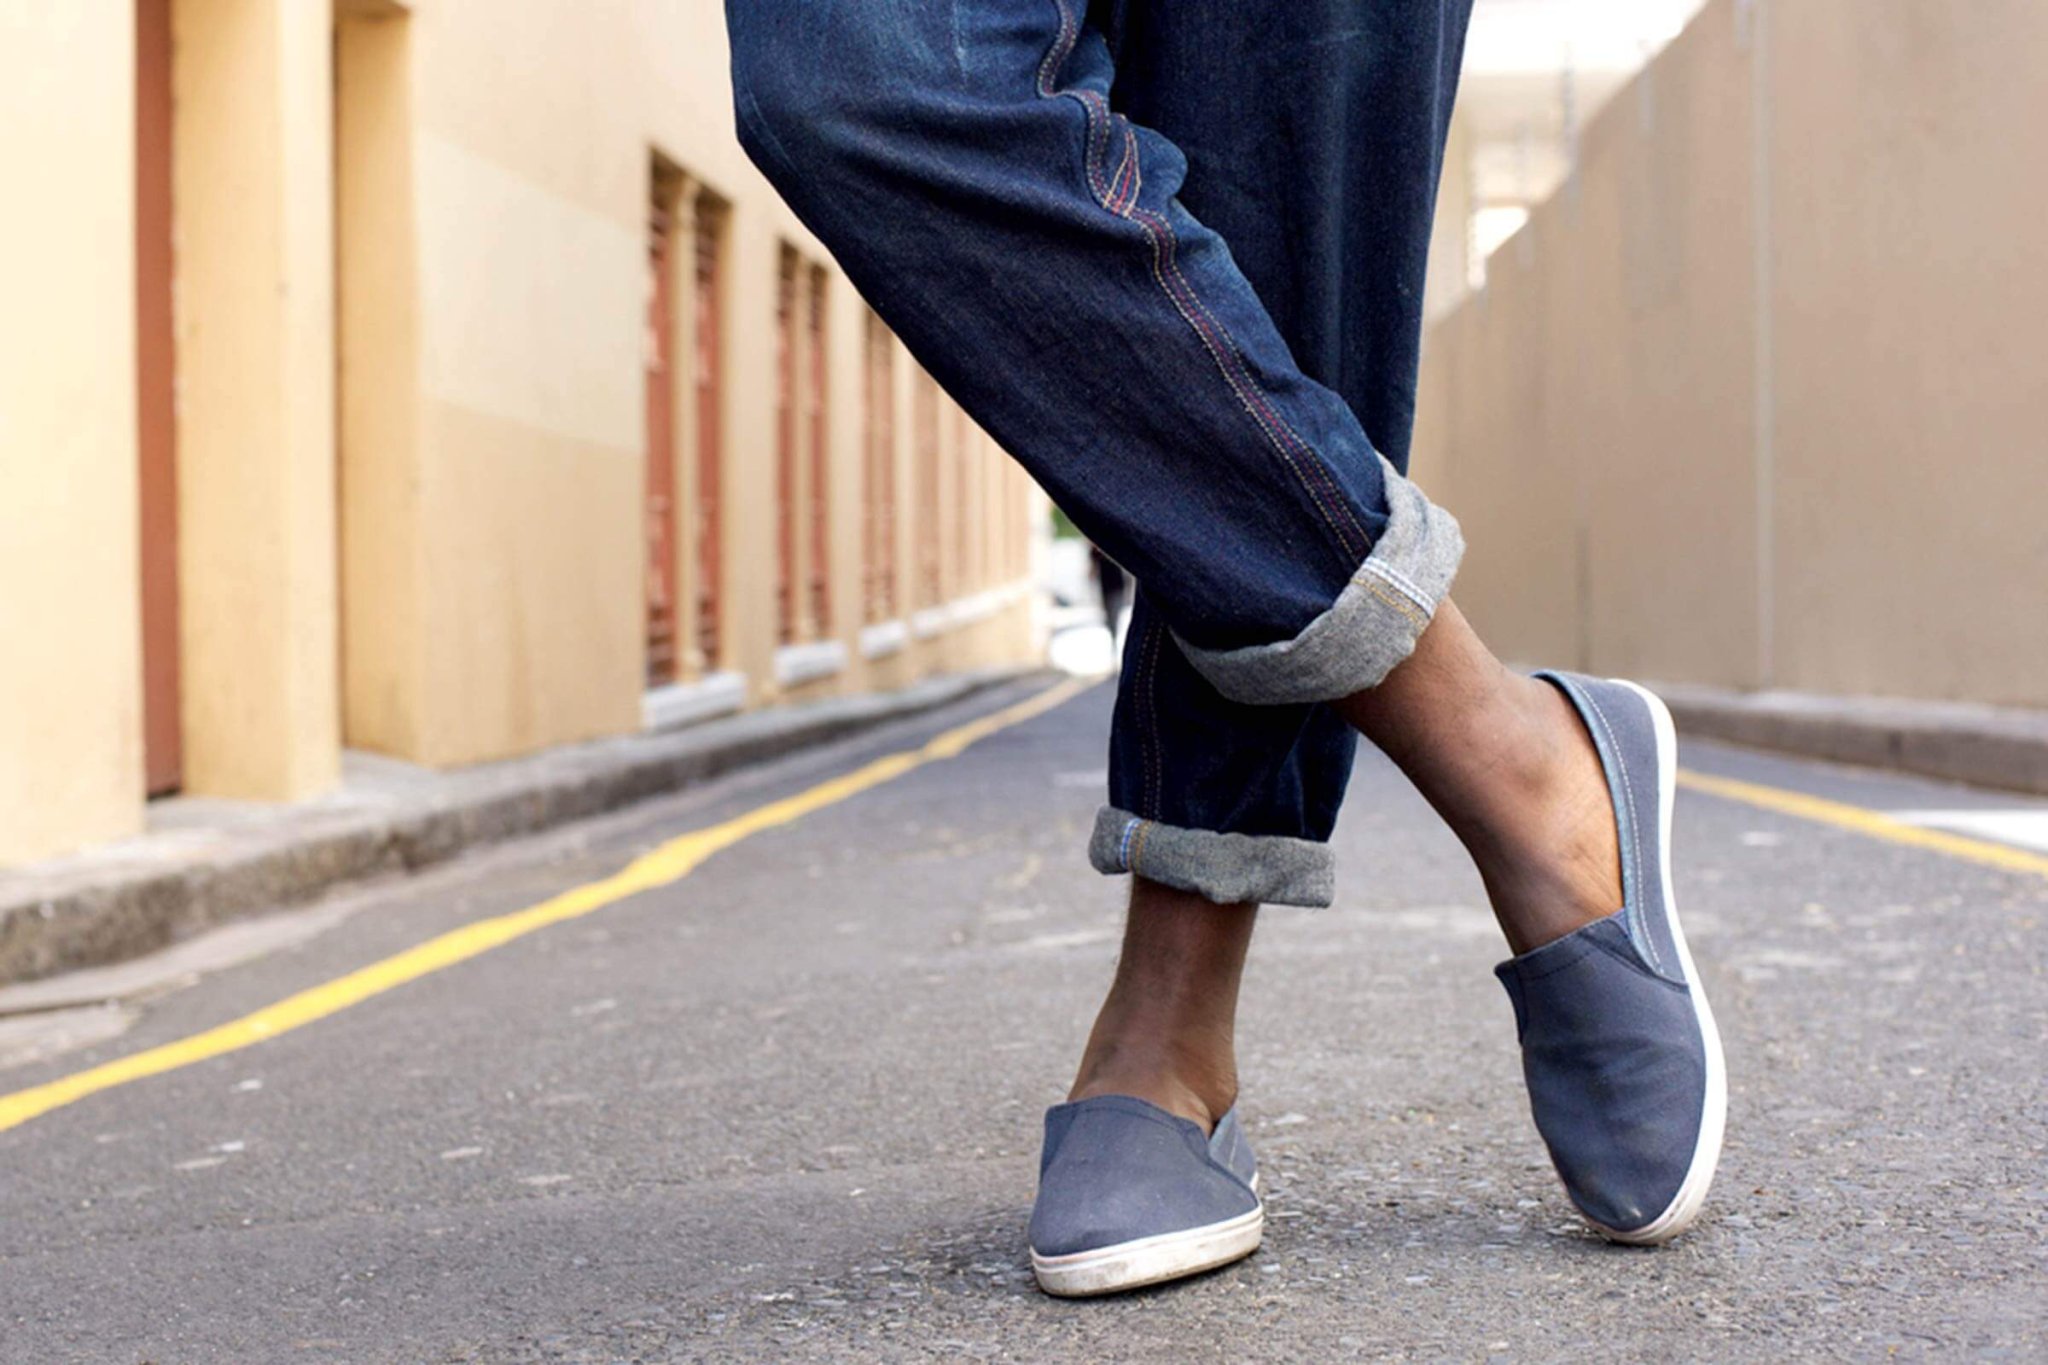 This Is Why Wearing Shoes Without Socks Could Make You Sick